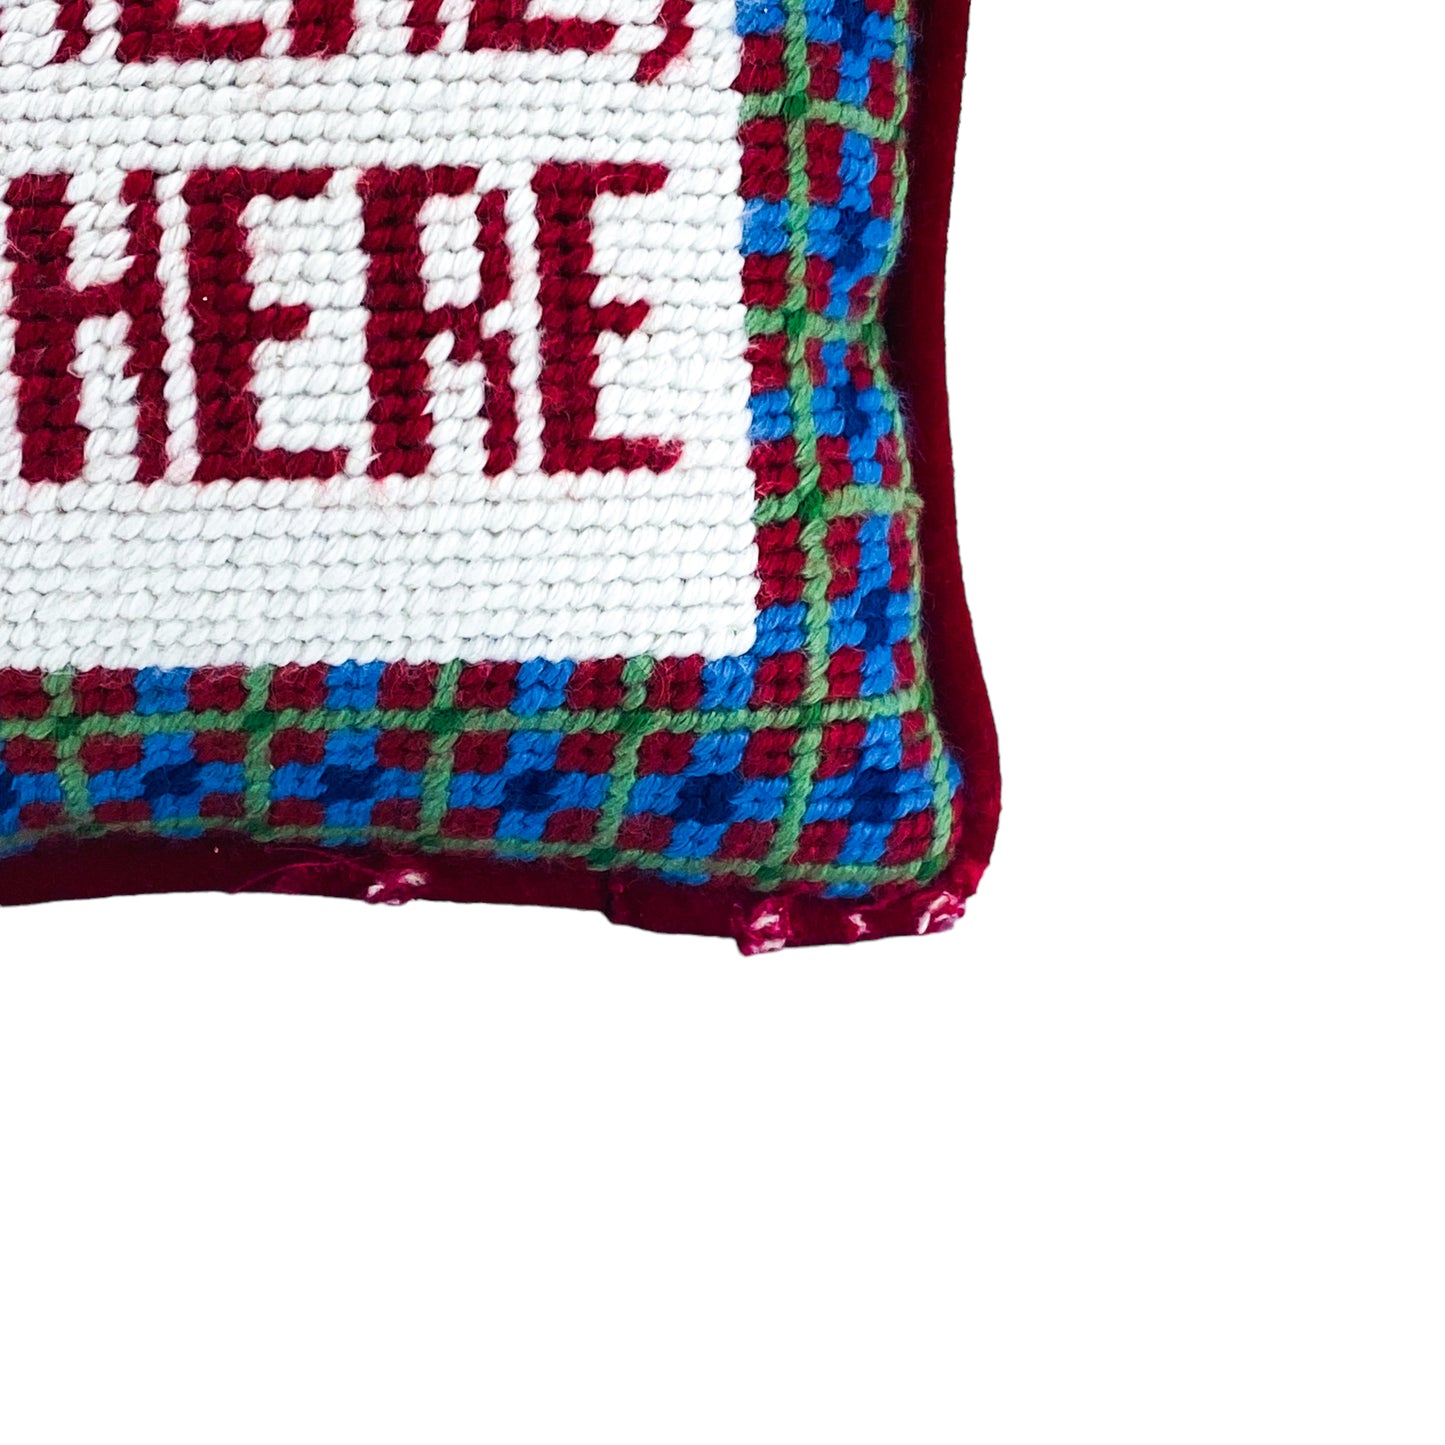 Vintage “Been There Still There” Needlepoint Pillow